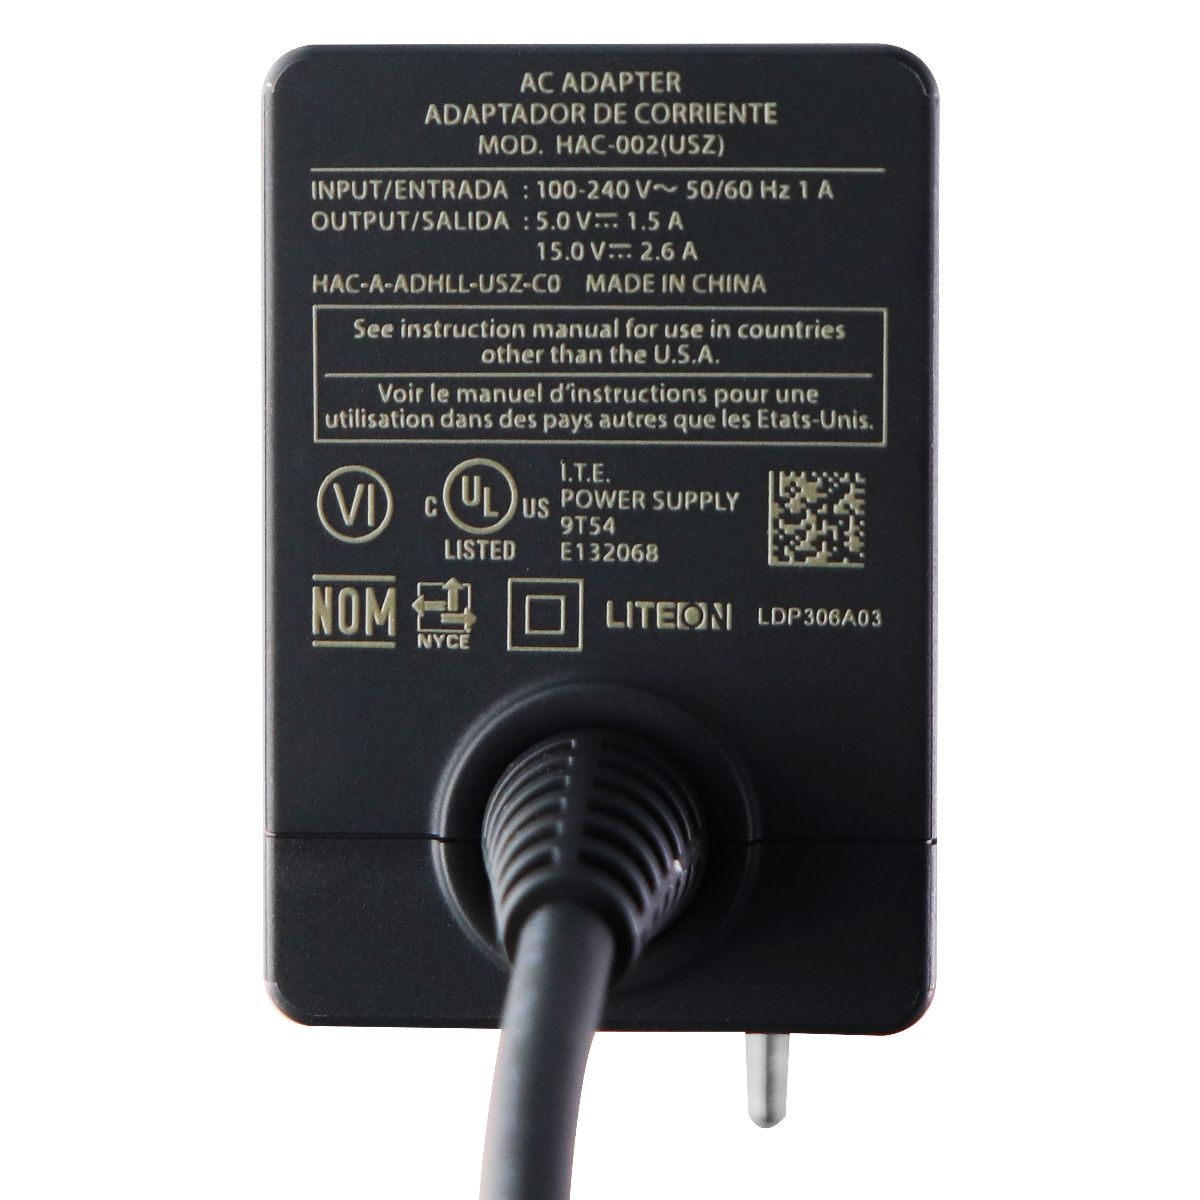 Restored Nintendo Switch AC Adapter Wall Charger USB-C Cable - Black OEM (HACAADHGA) (Refurbished) - image 4 of 4